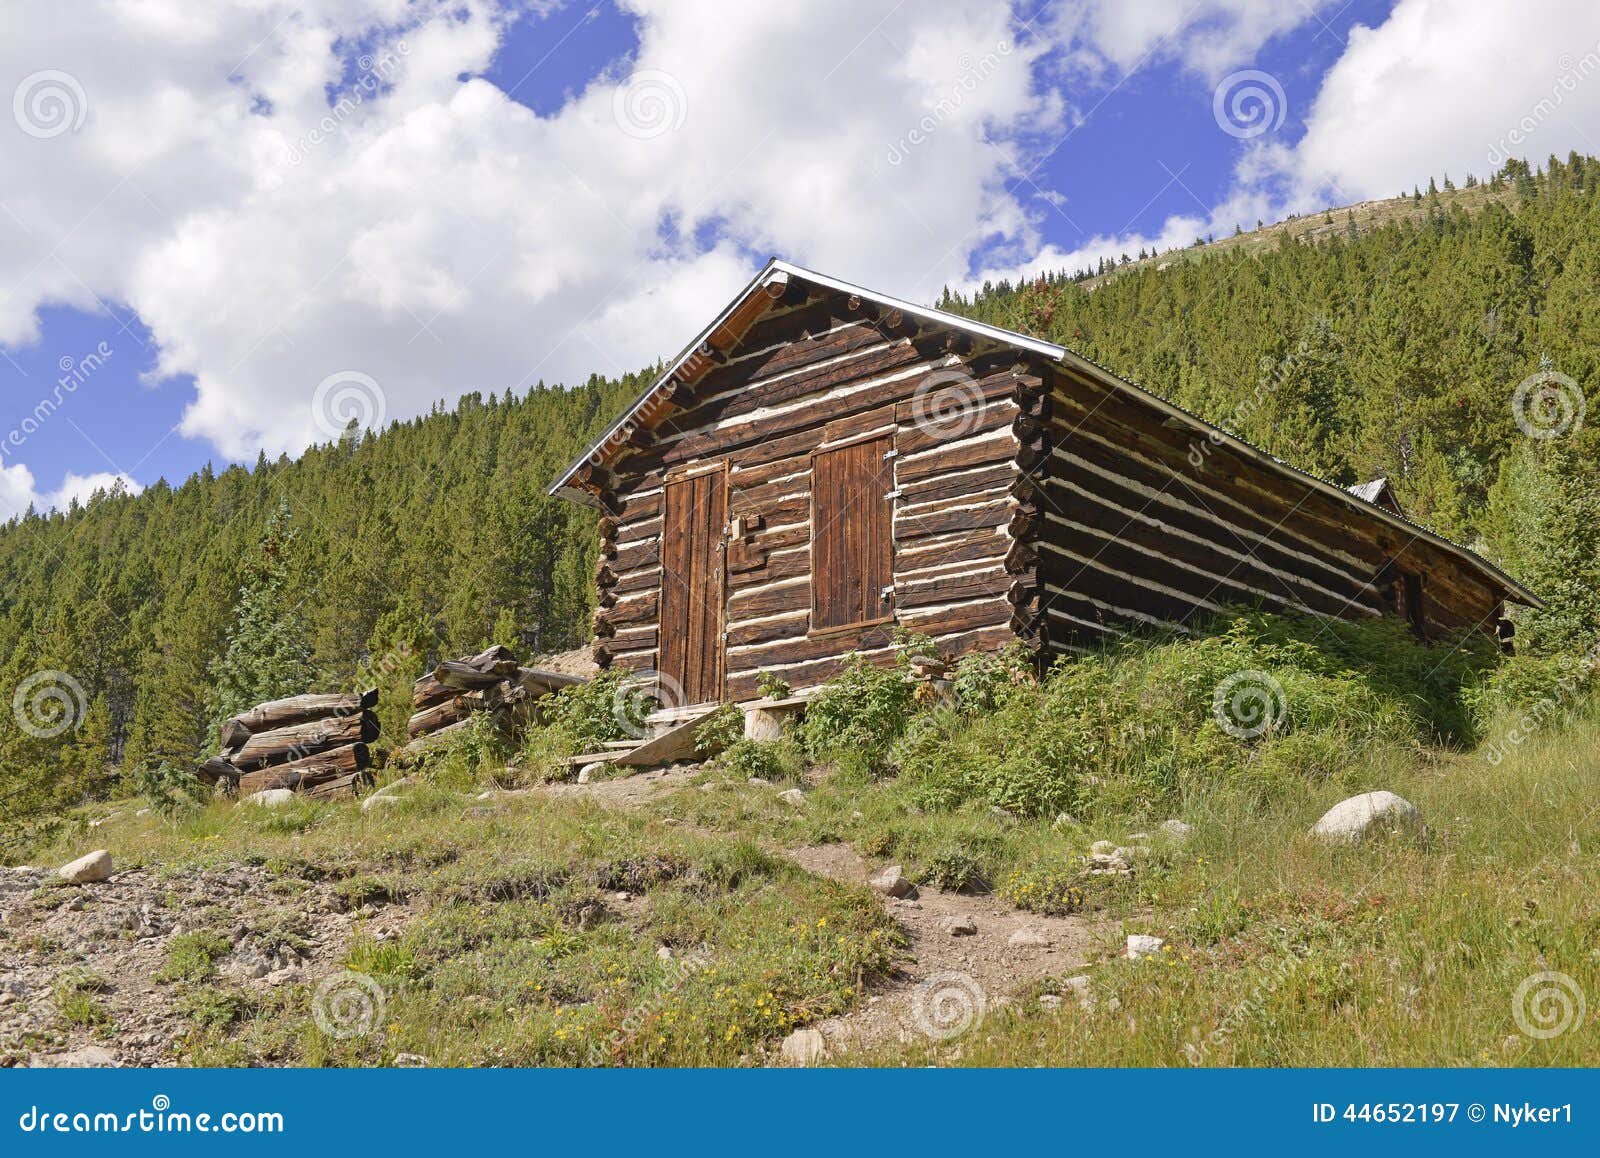 Vintage log cabin on farm in the mountains. Vintage log cabin in old mining town